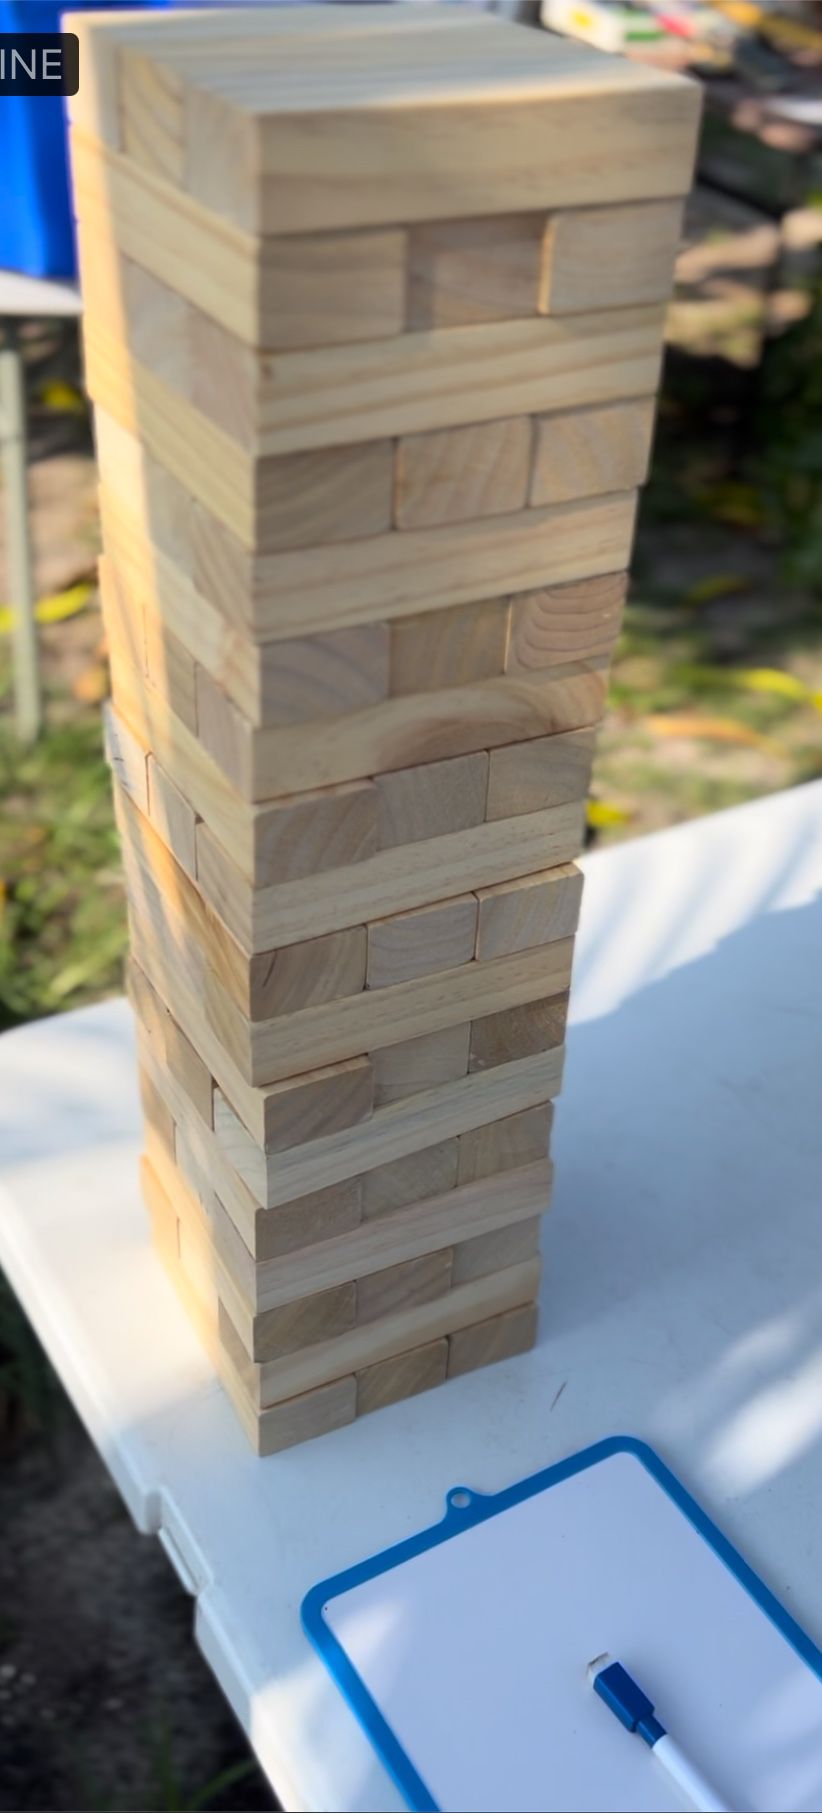 WOOD CITY-GIANT WOODEN TOWER GAME 